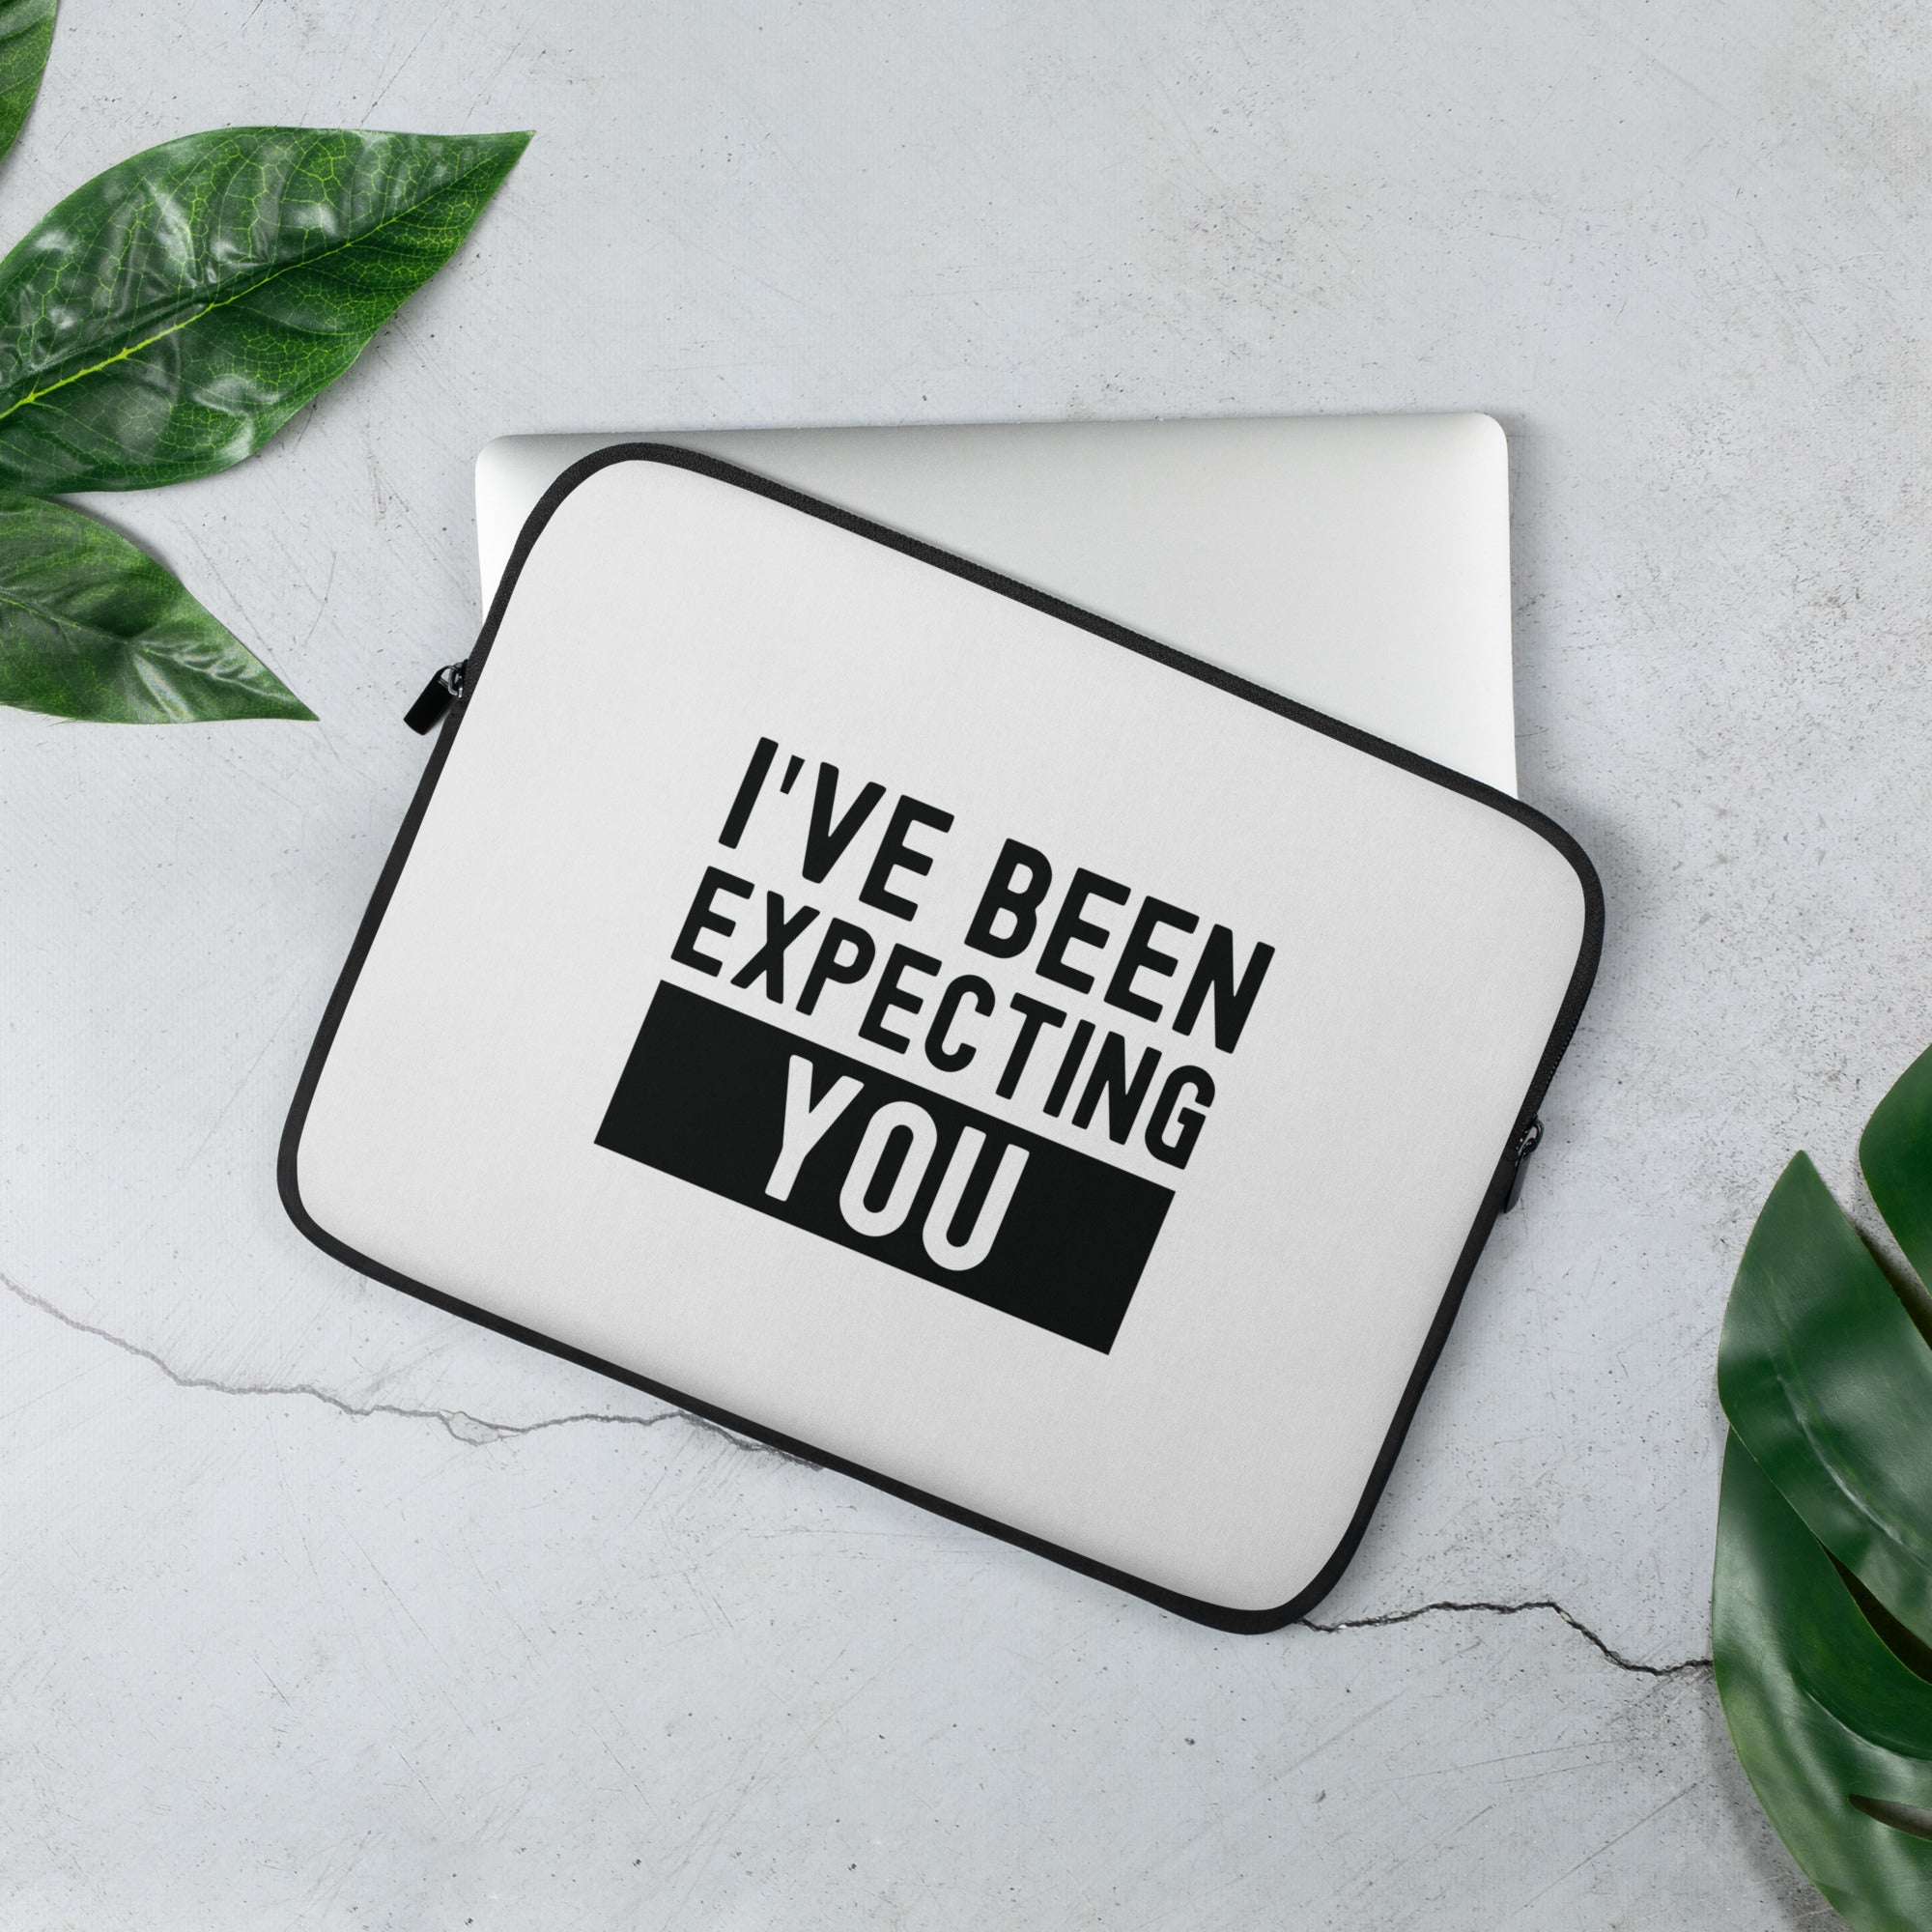 Laptop Sleeve | I've been expecting you